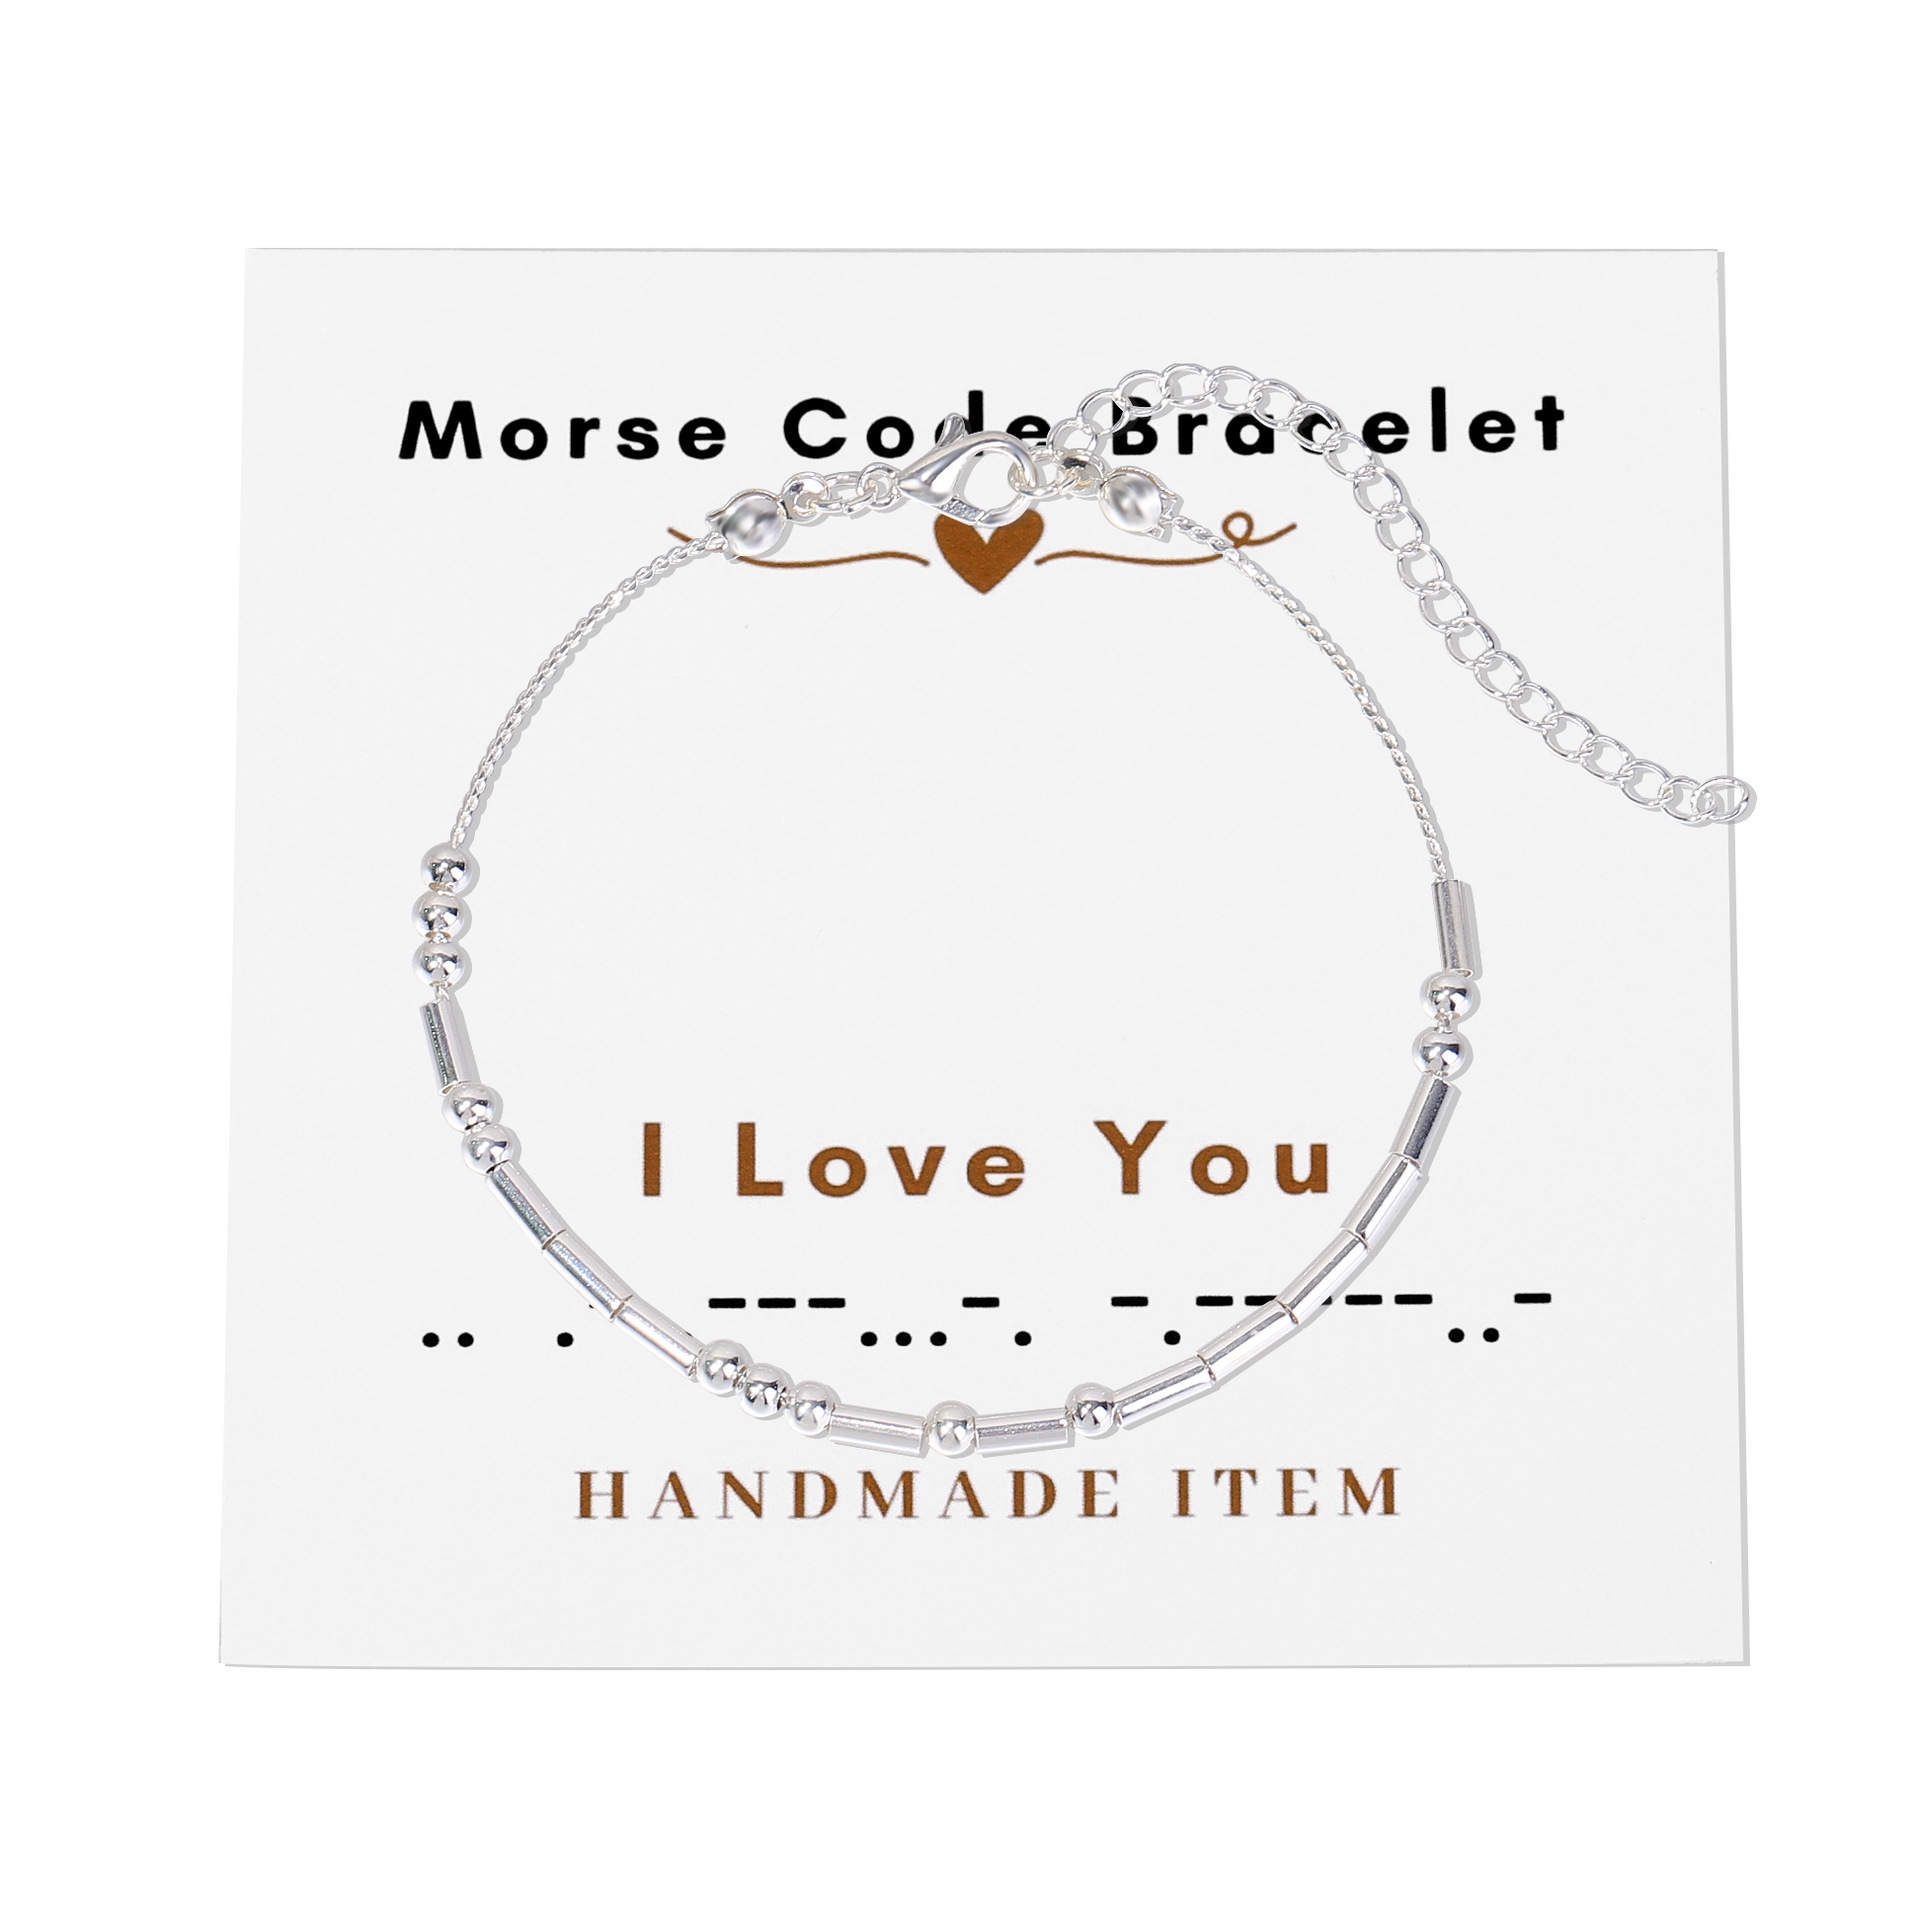 How To Make a DIY Morse Code Bracelet - Love and Marriage